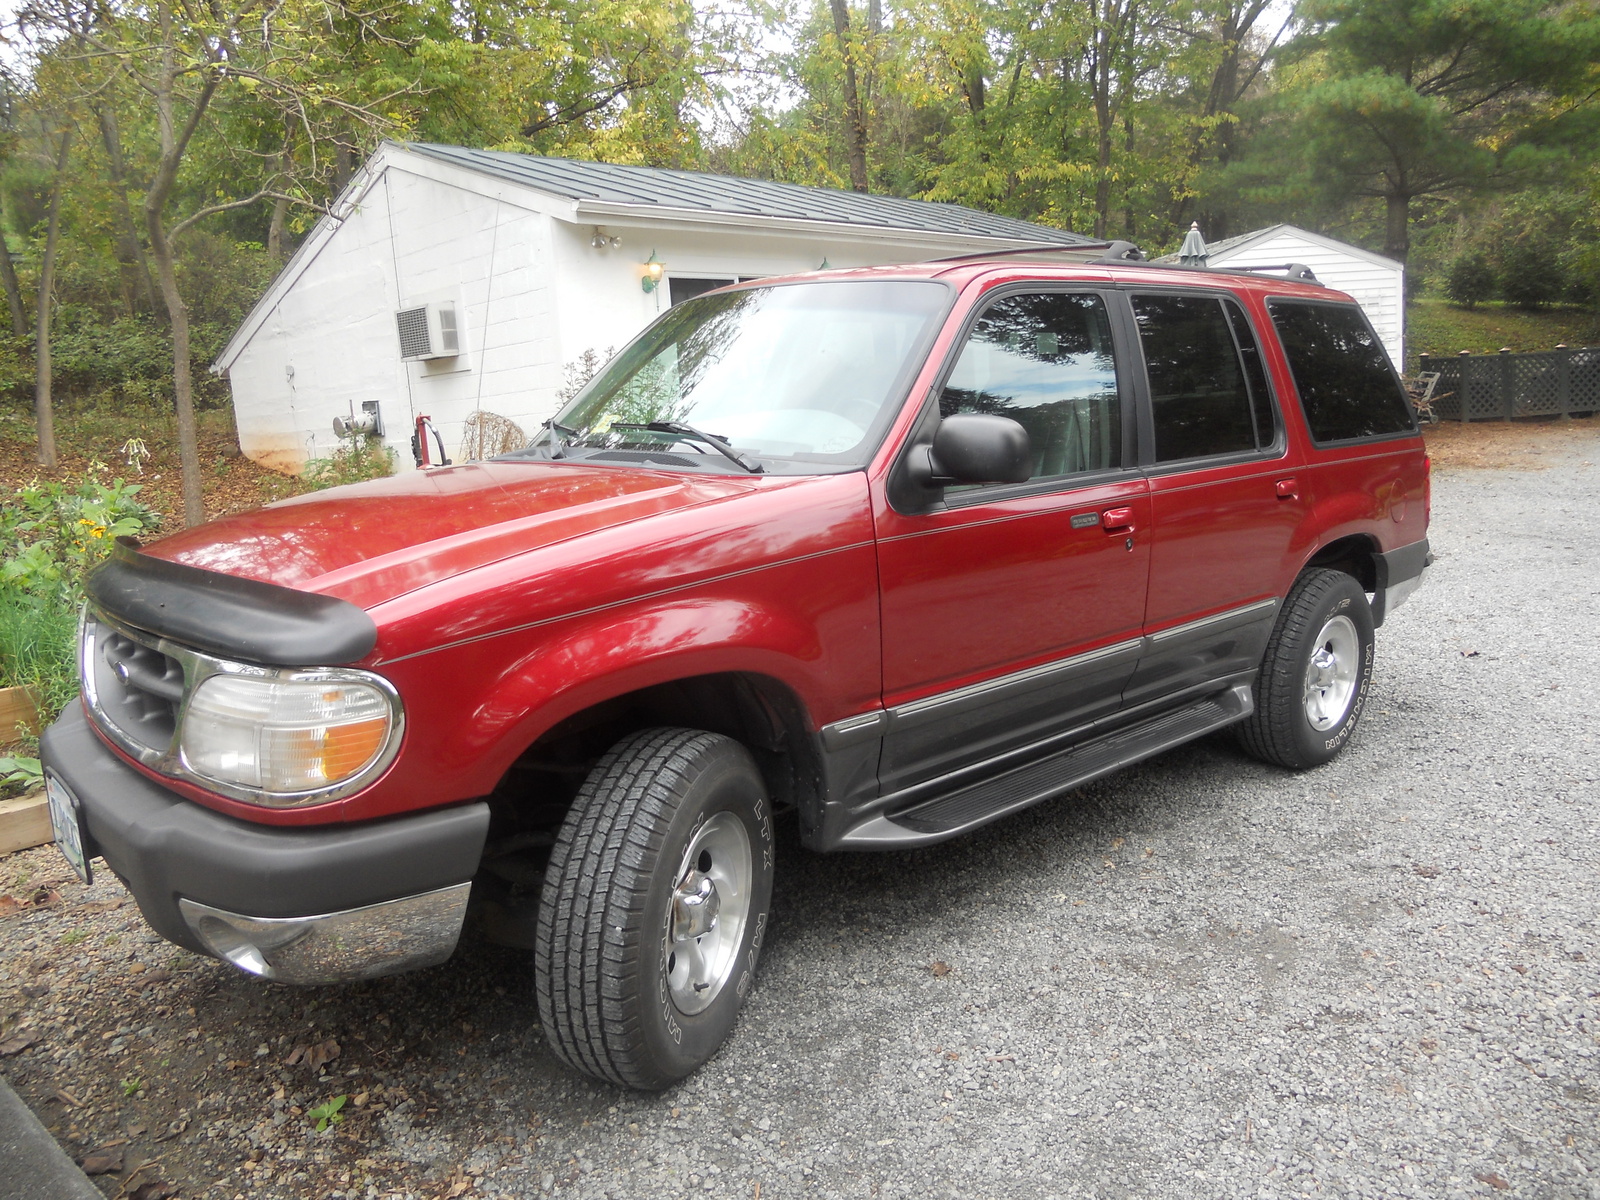 1999 Ford explorers good cars #7